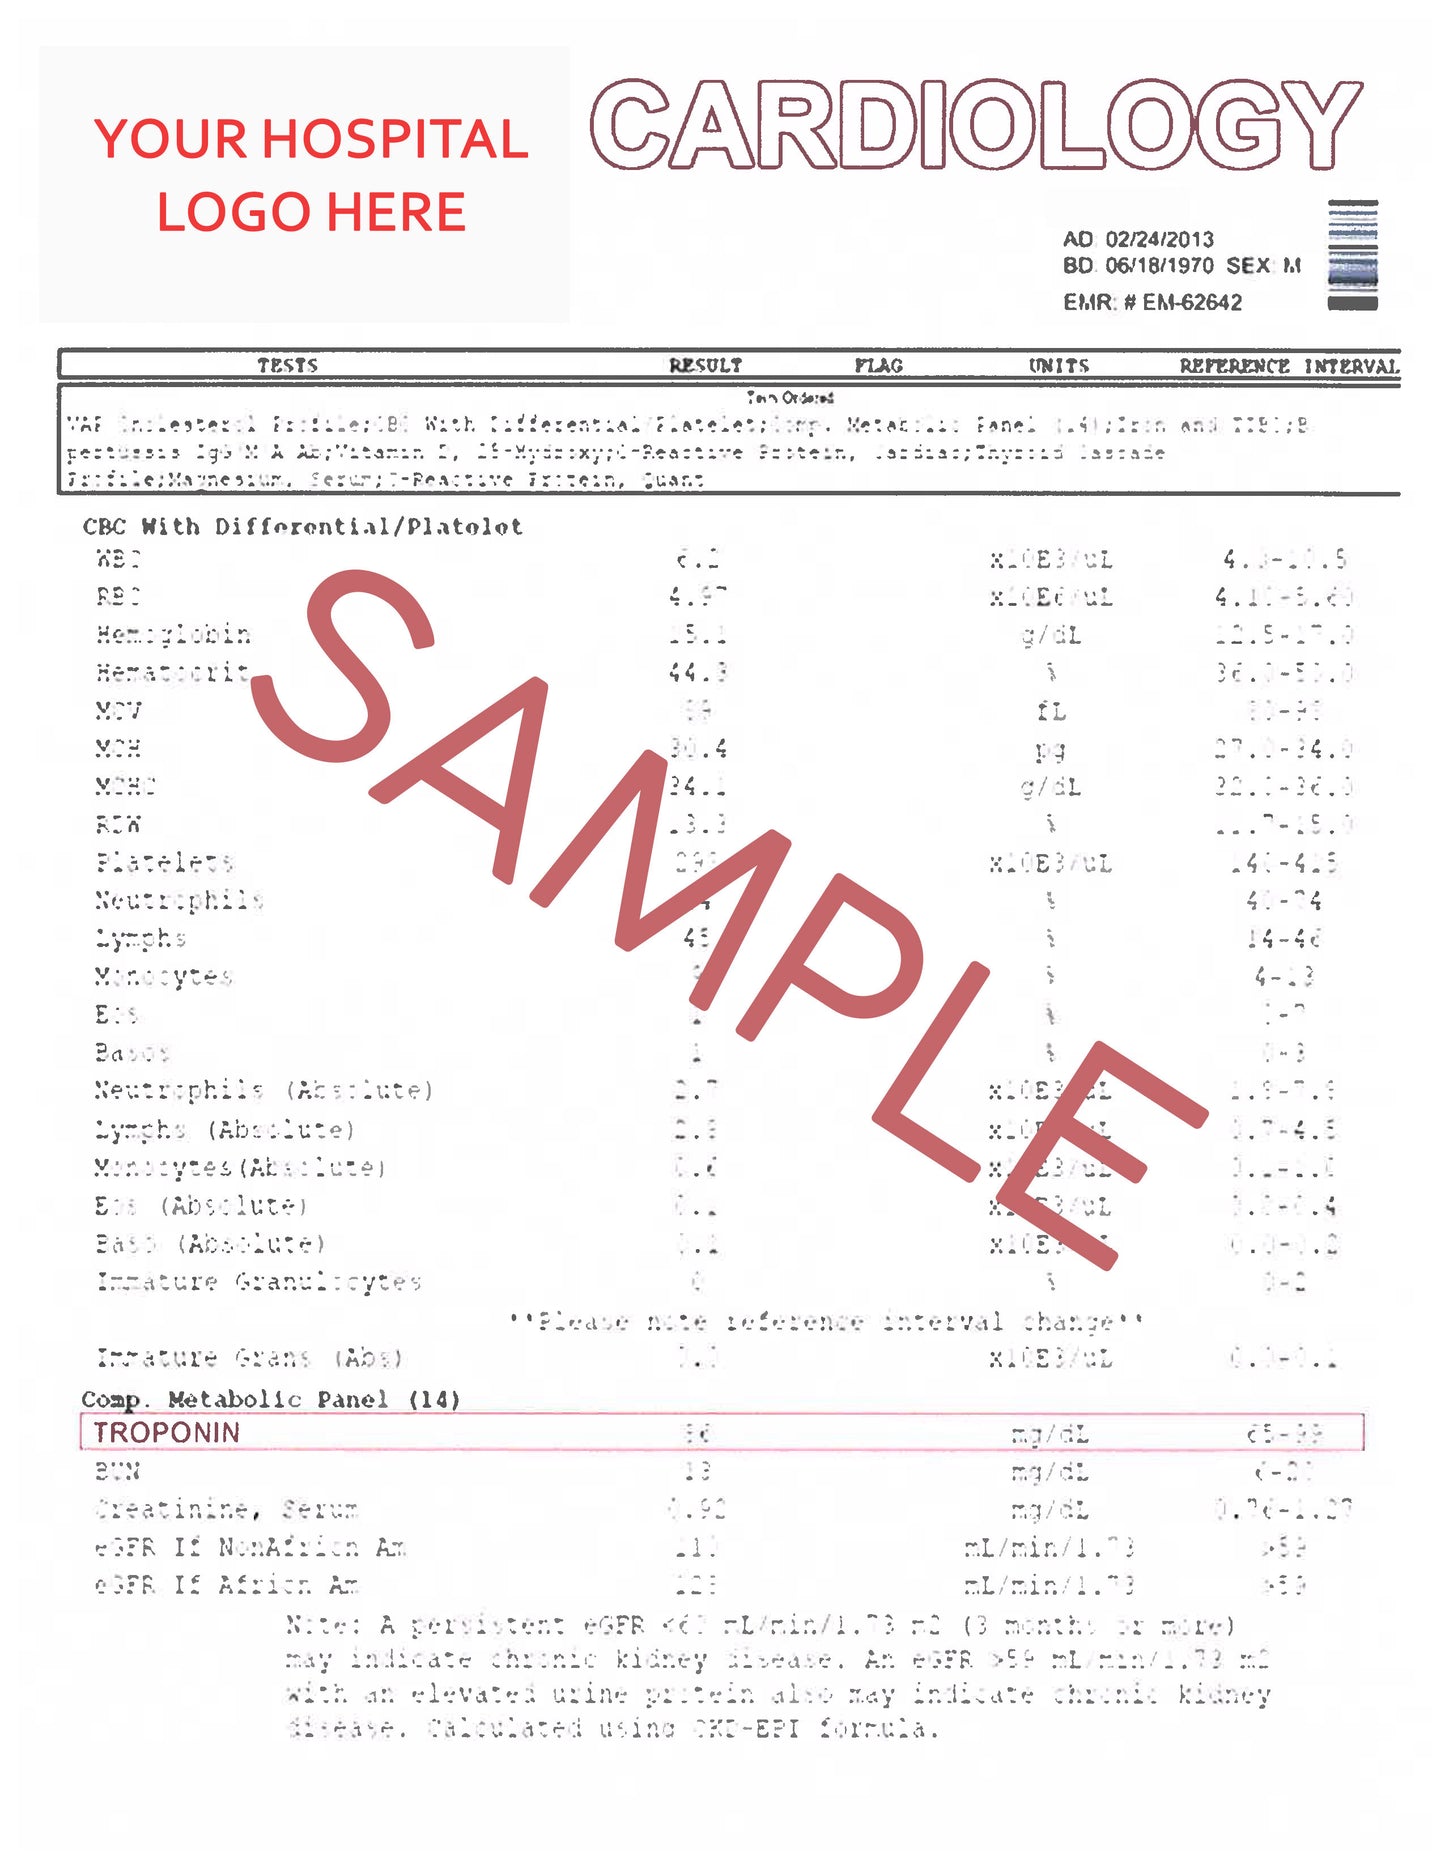 CUSTOMIZED CARDIOLOGY REPORT FORM (5 pages)